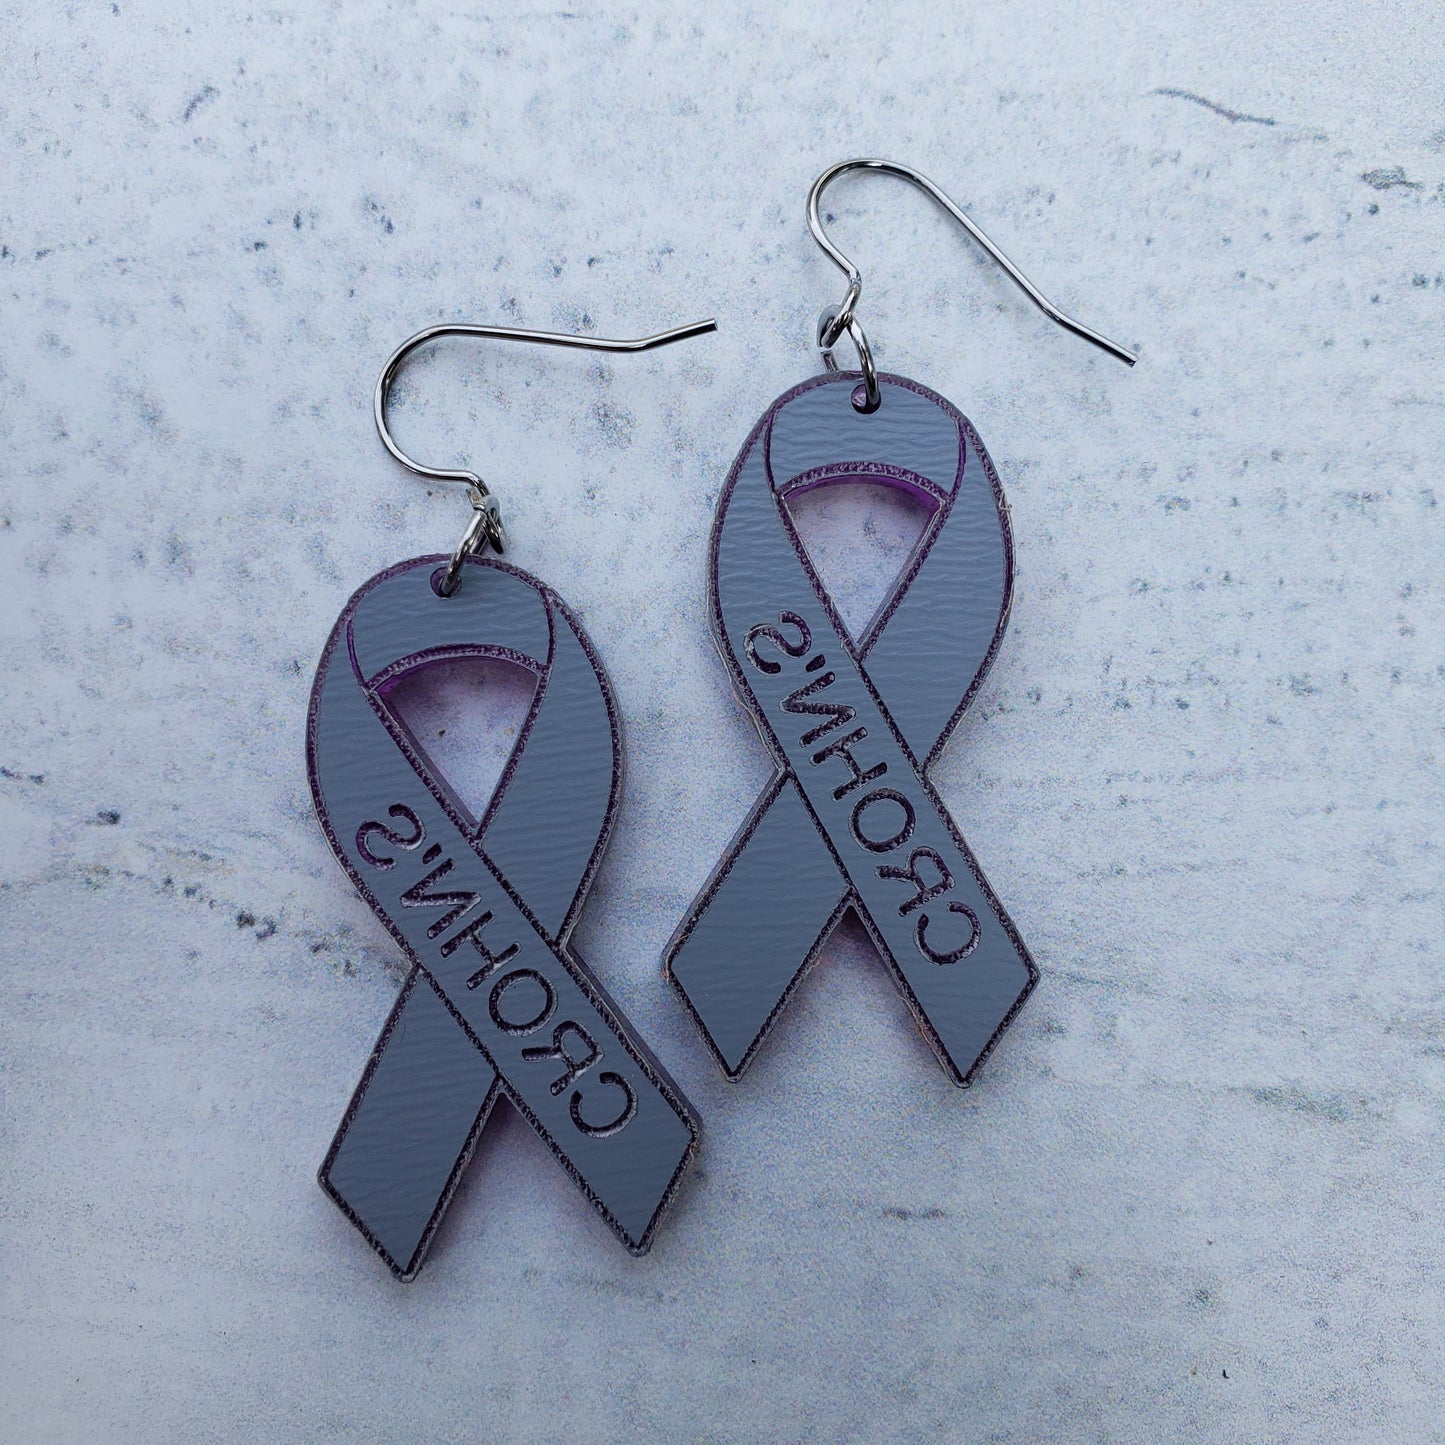 Backside of Crohn's Engraved purple mirror acrylic awareness ribbons on stainless steel earring wires.